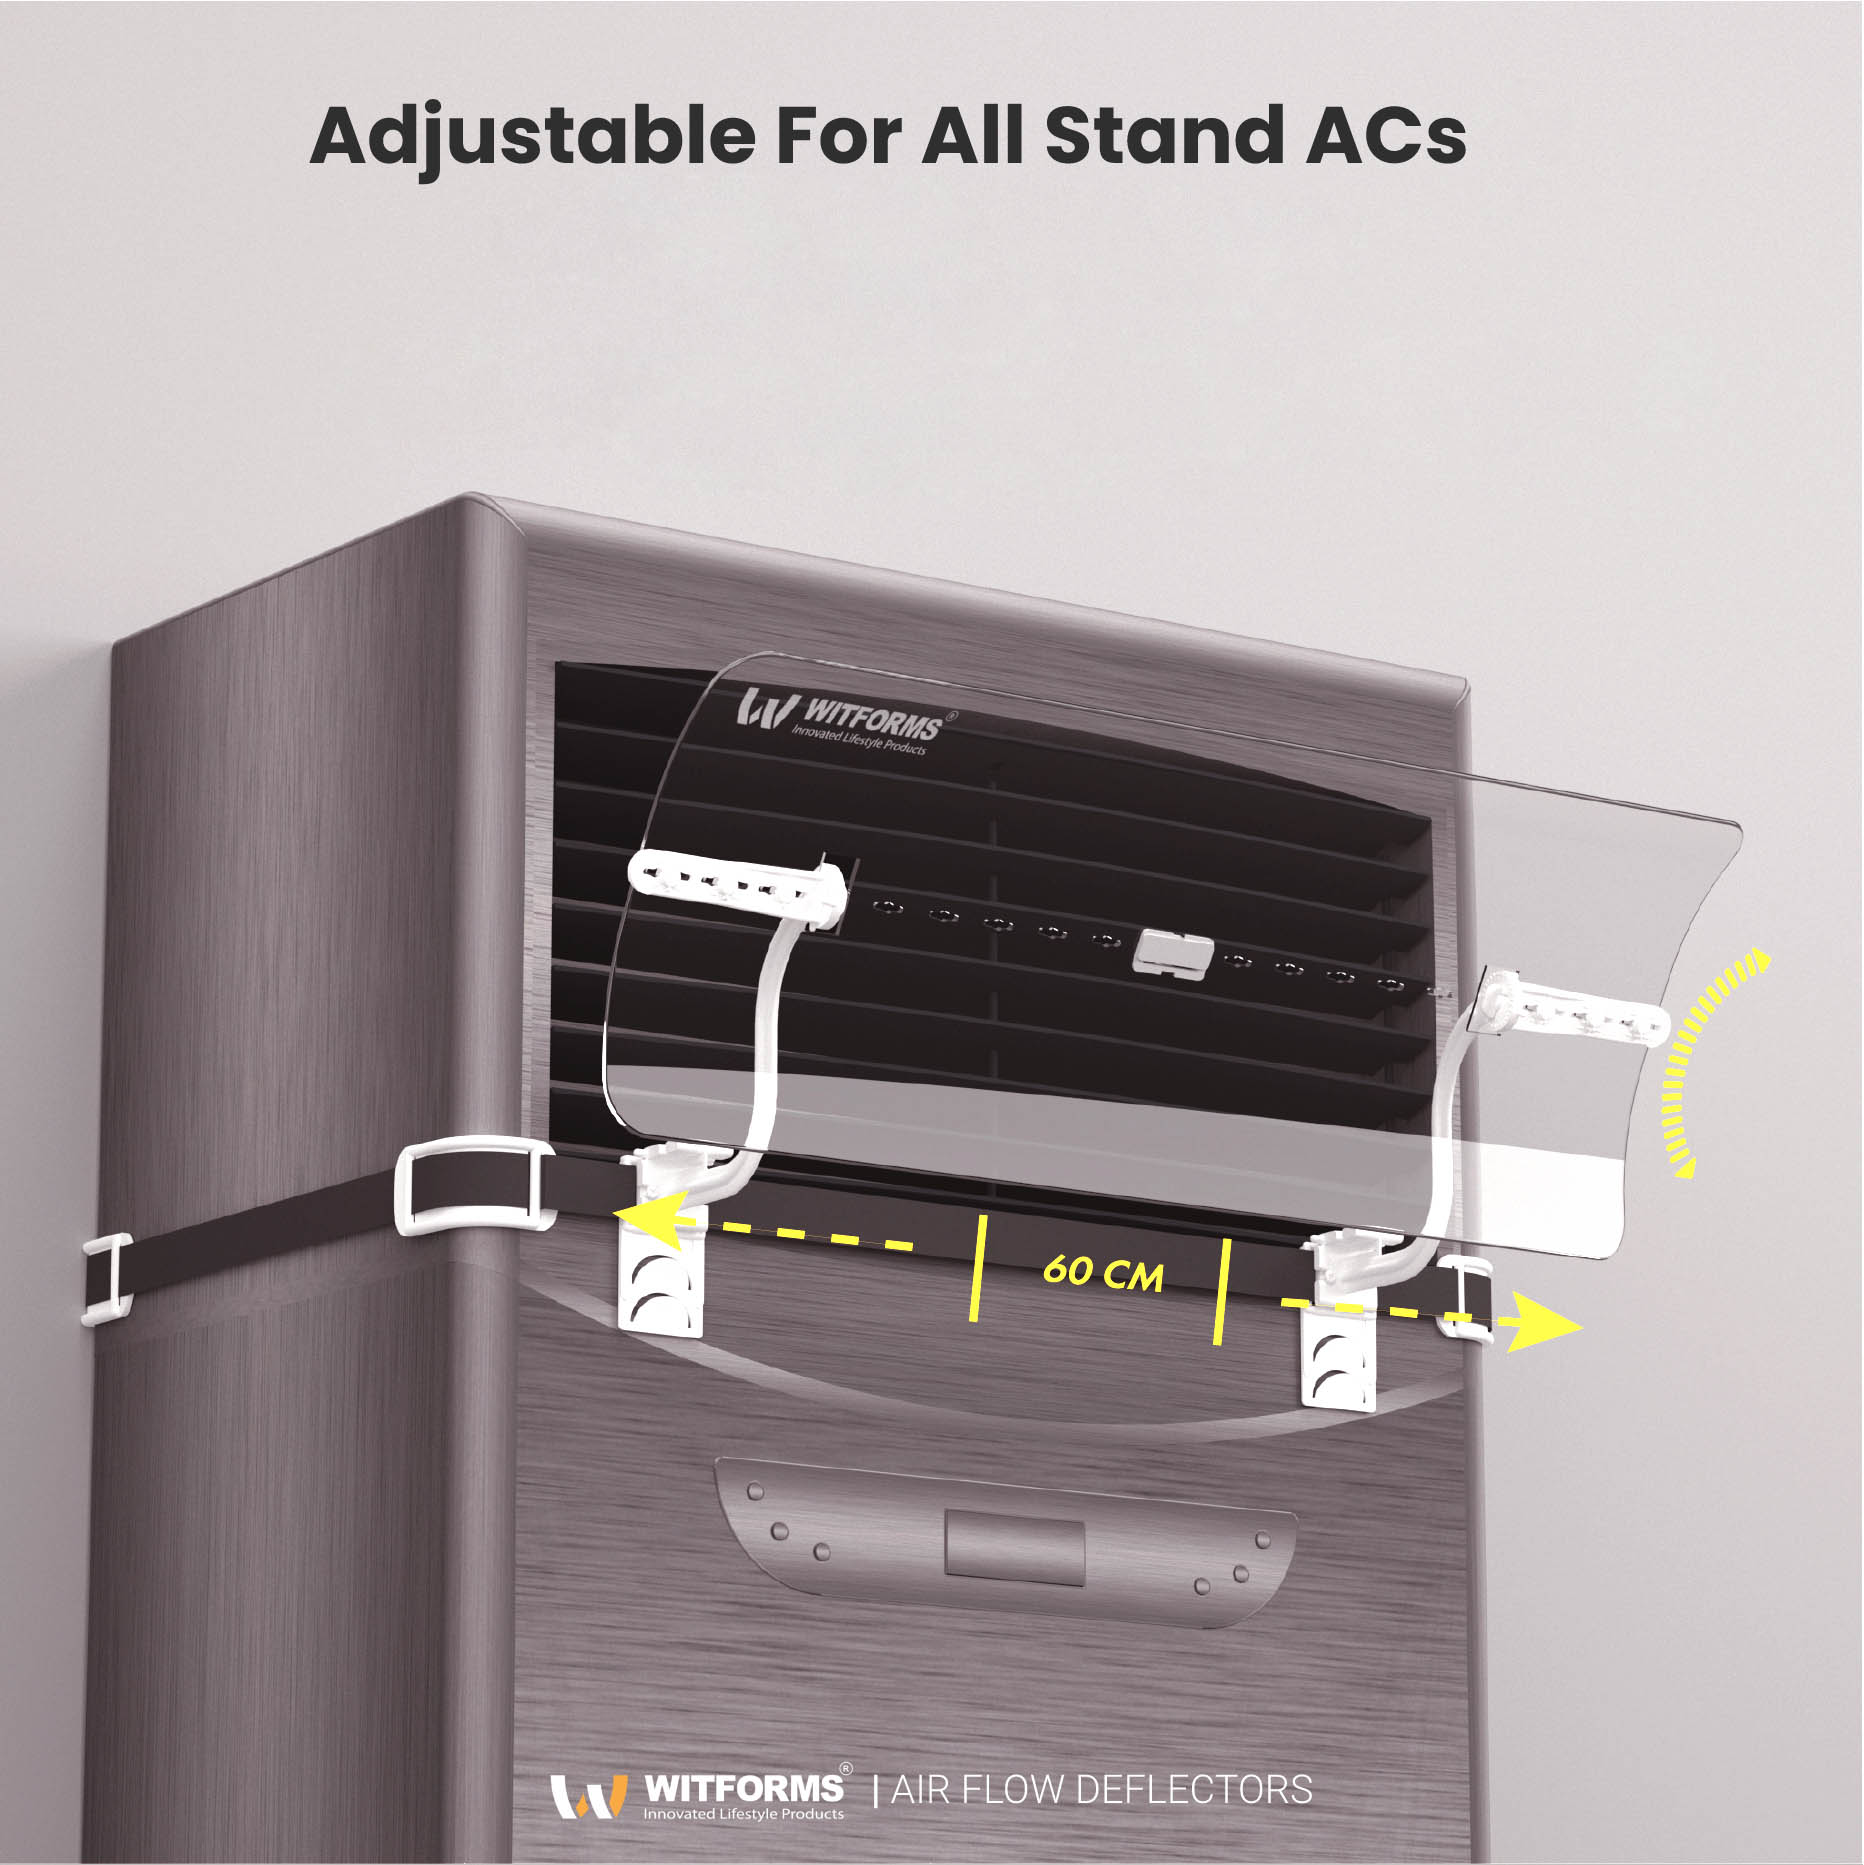 Witforms Stand Air Conditioner Deflector Central AC Air Flow Deflector Prevent The Cold Air from Blowing